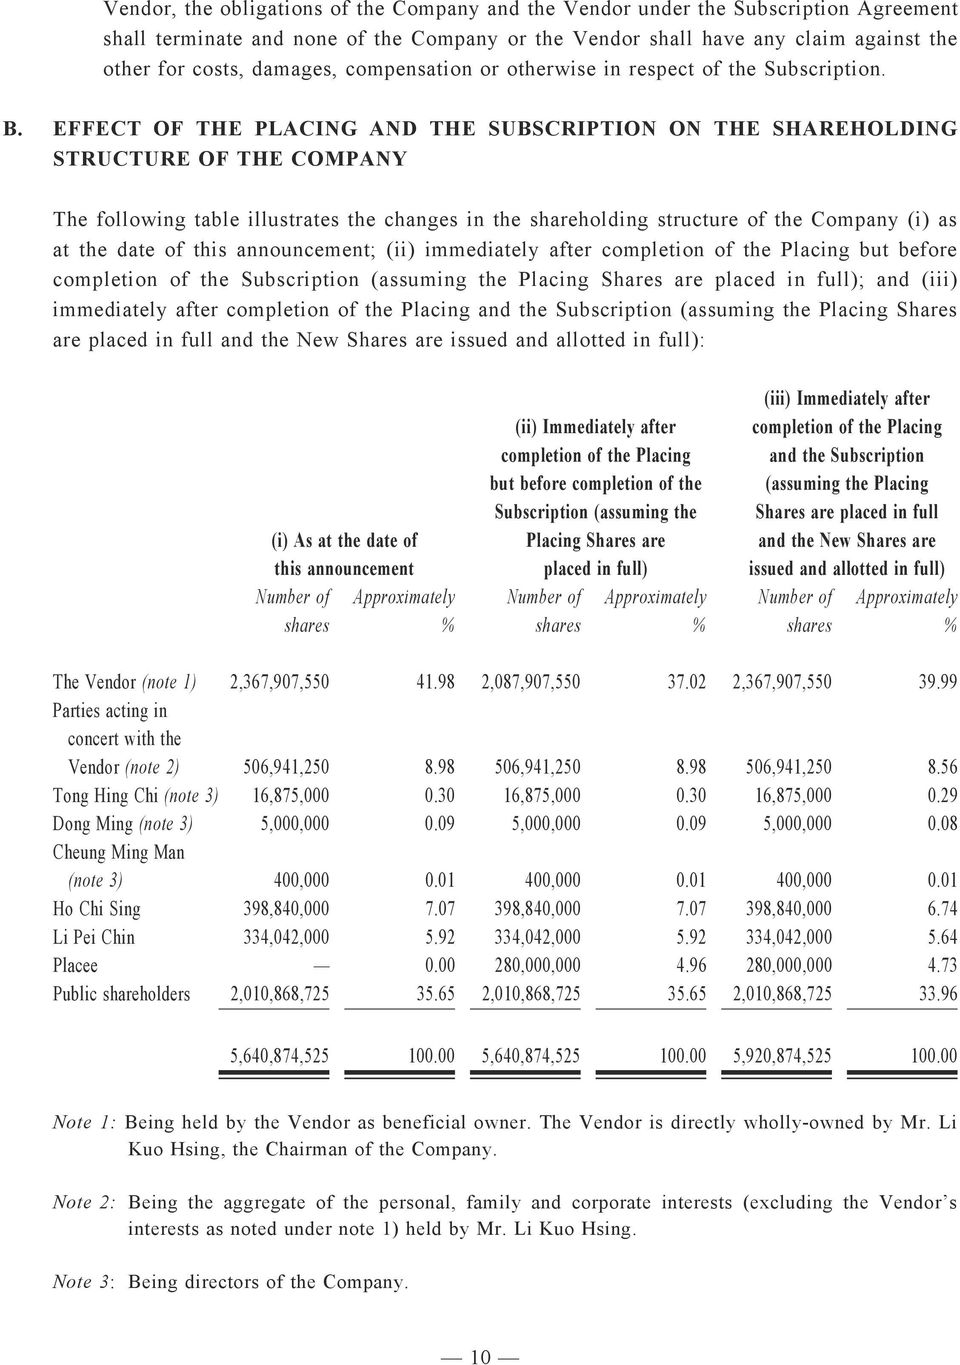 EFFECT OF THE PLACING AND THE SUBSCRIPTION ON THE SHAREHOLDING STRUCTURE OF THE COMPANY The following table illustrates the changes in the shareholding structure of the Company (i) as at the date of